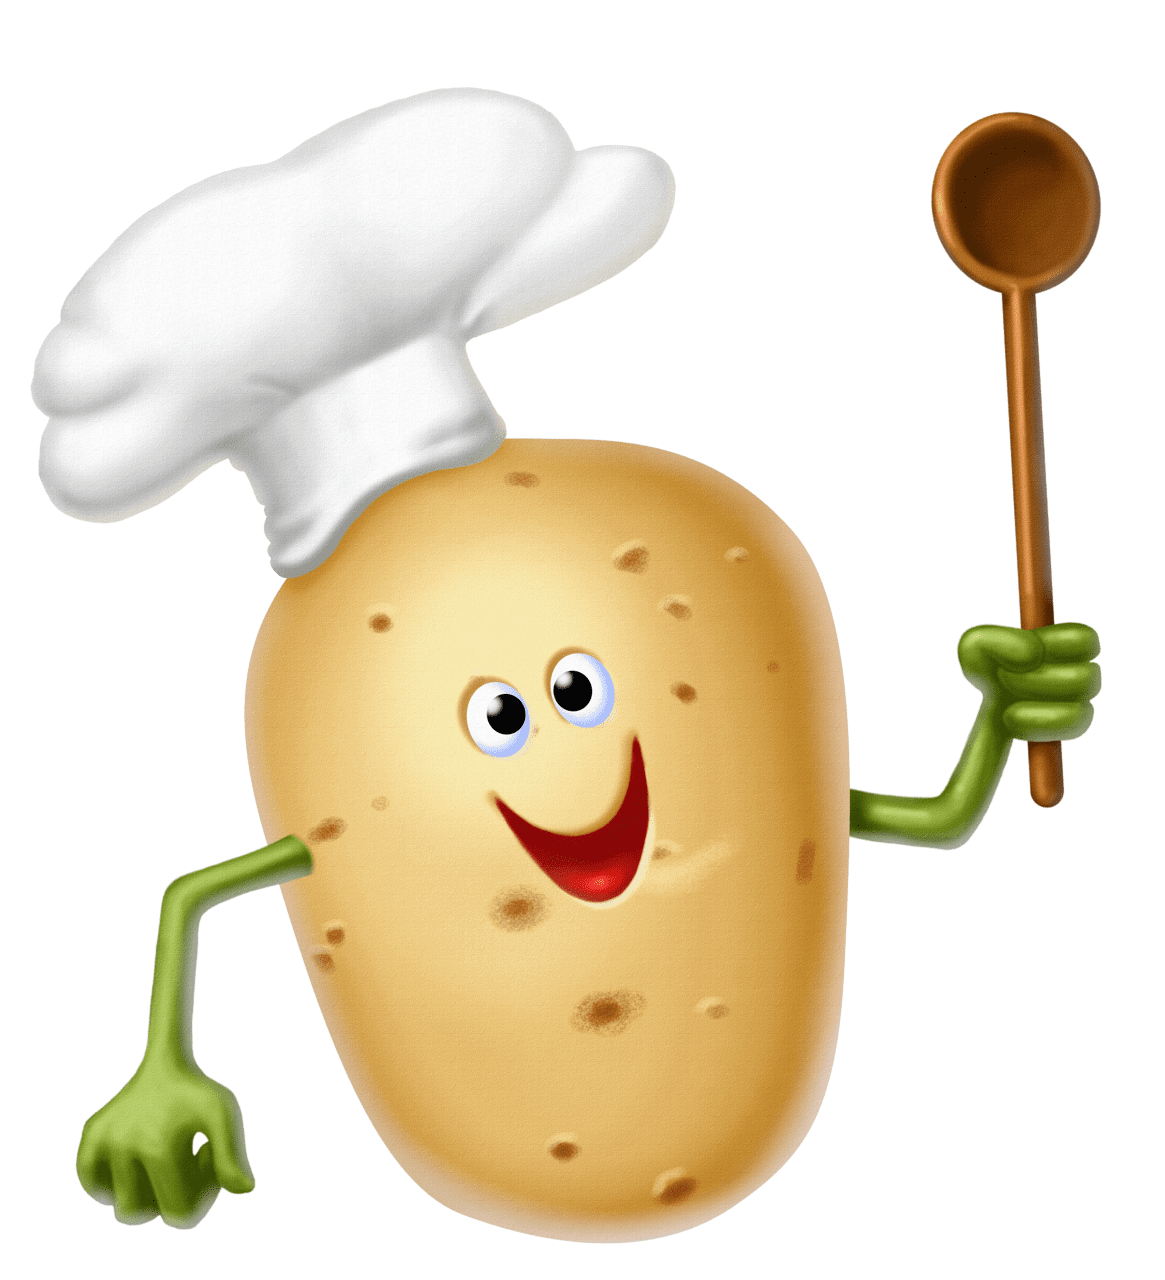 A cartoon potato chef wearing a chef's hat and apron, holding a spatula and smiling.